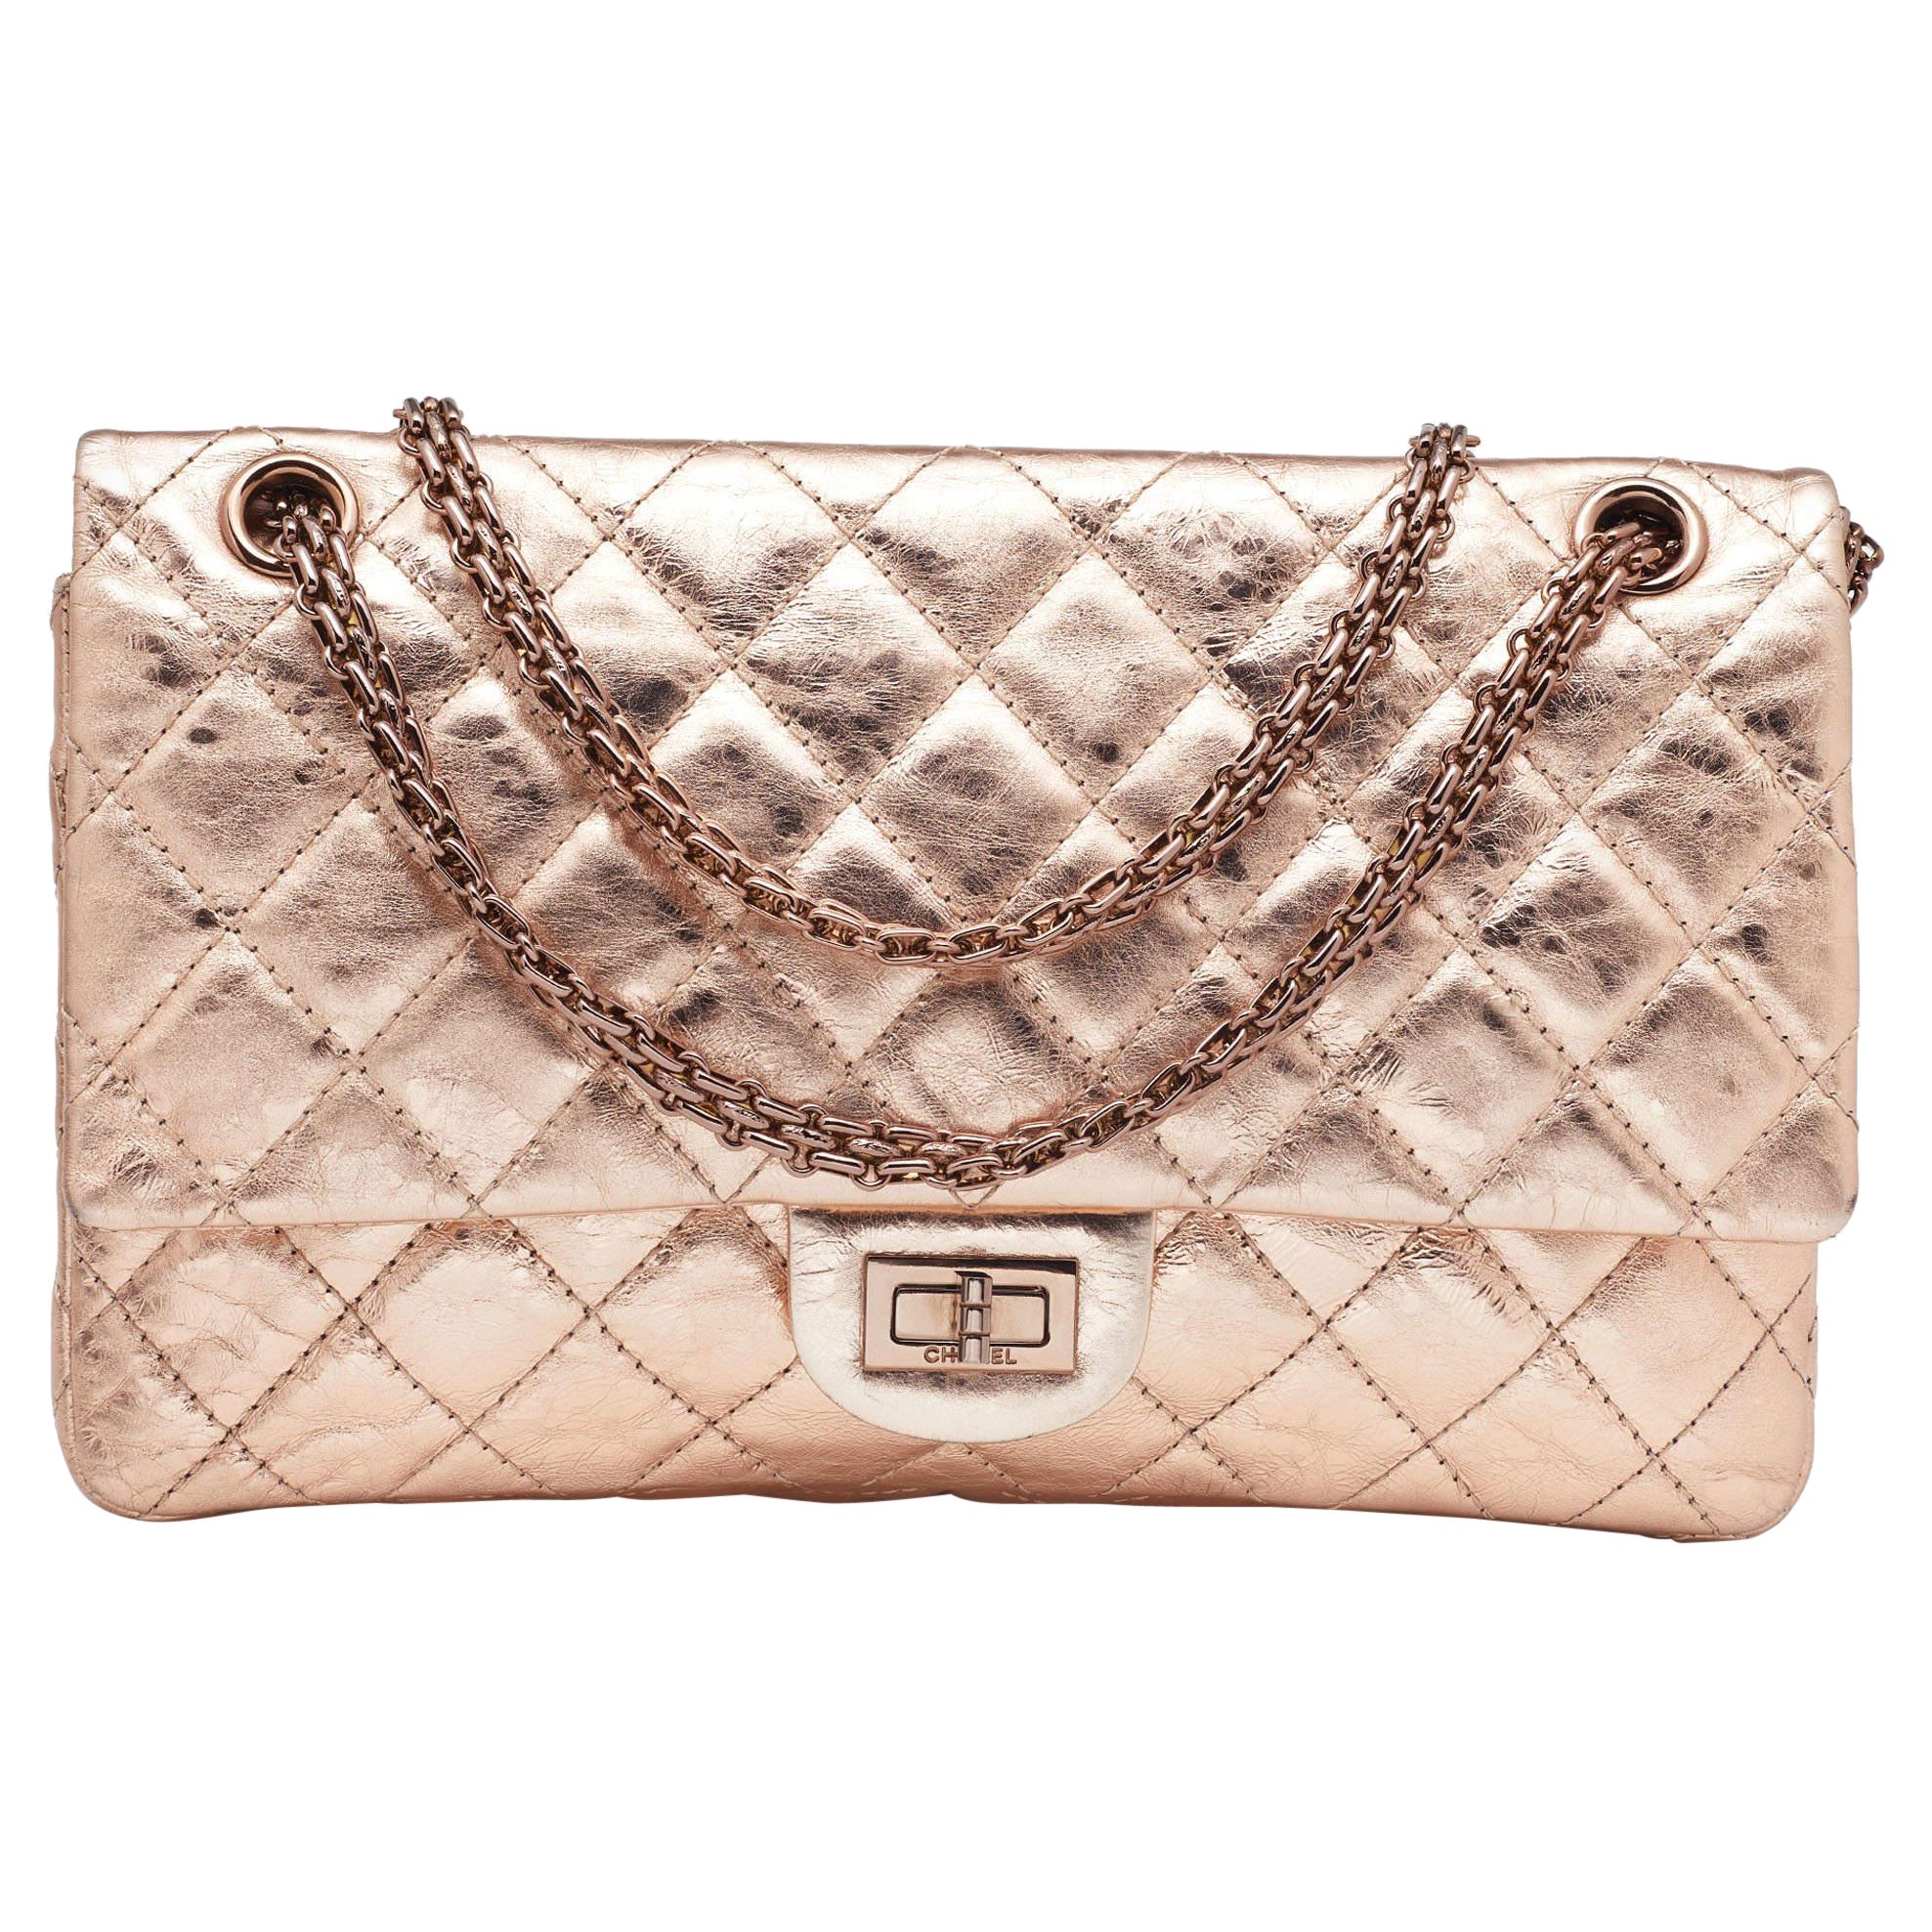 Chanel Rose Gold Quilted Leather Reissue 2.55 Classic 226 Flap Bag